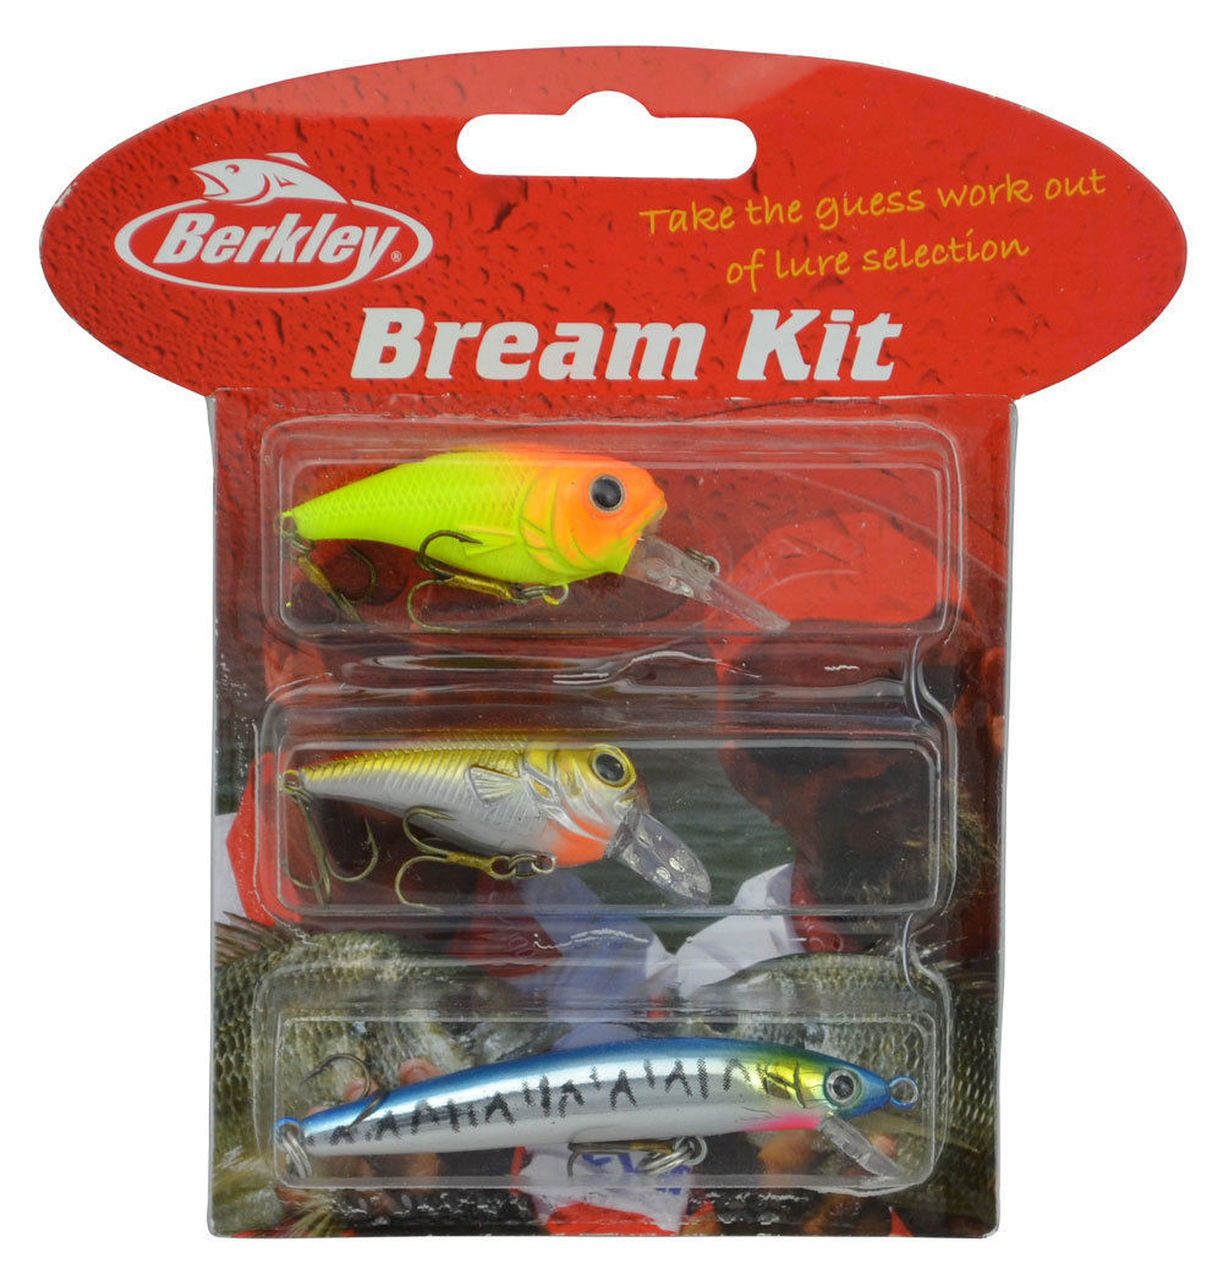 Fishing Lures for Sale, Fishing Lure Kits & More